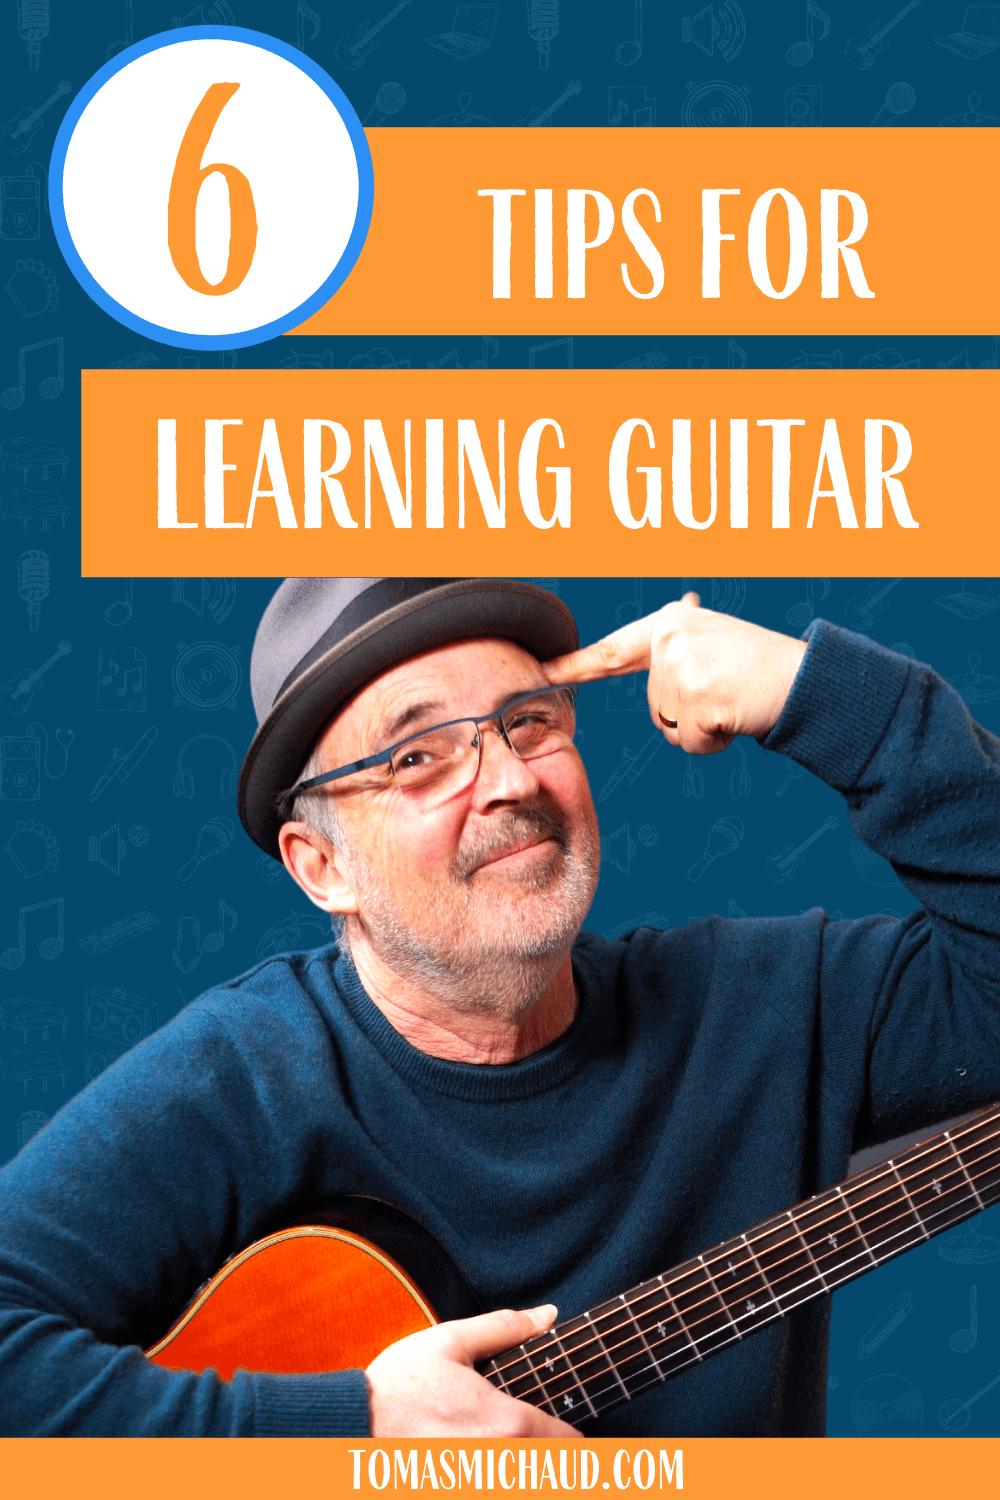 6 tips for learing guitar